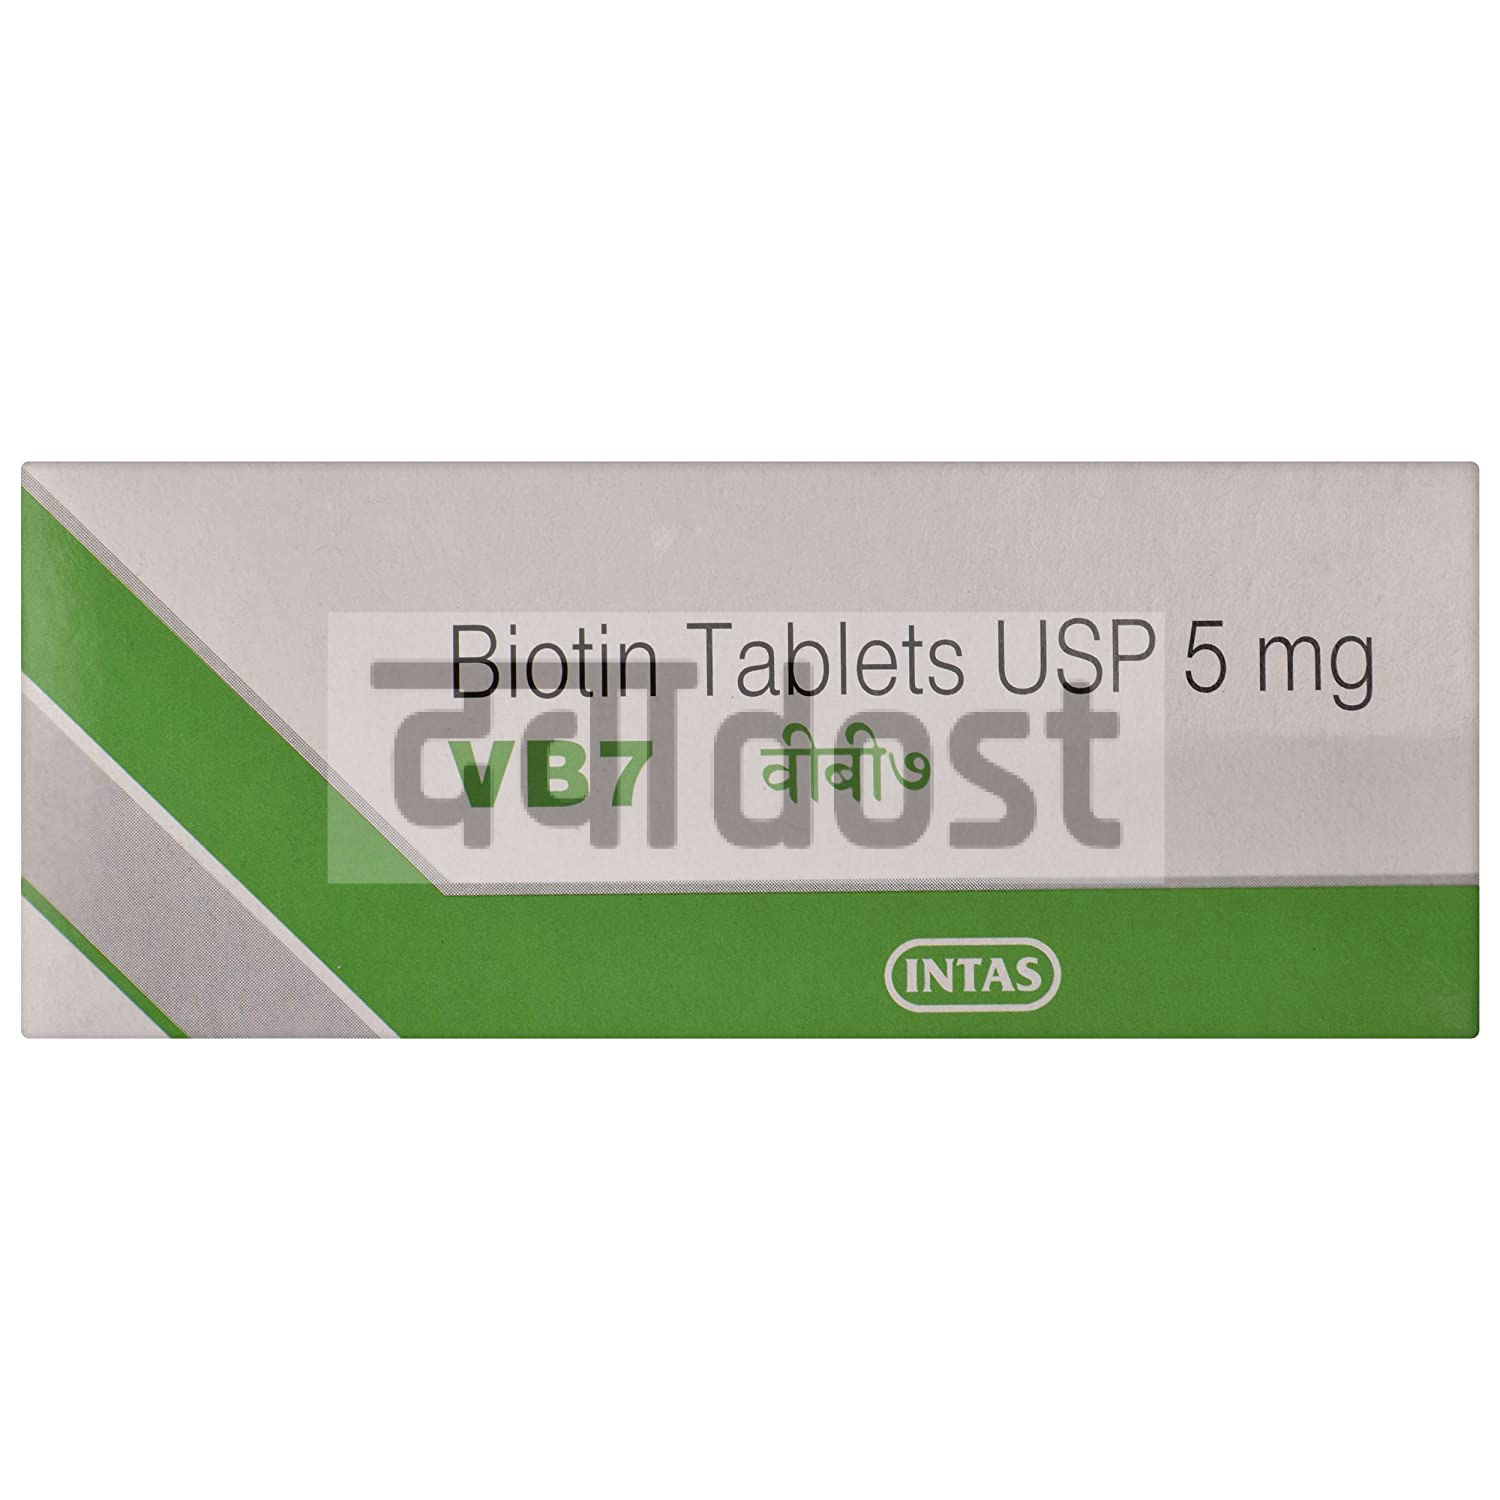 VB7 Hair Tablet Buy strip of 10 tablets at best price in India  1mg